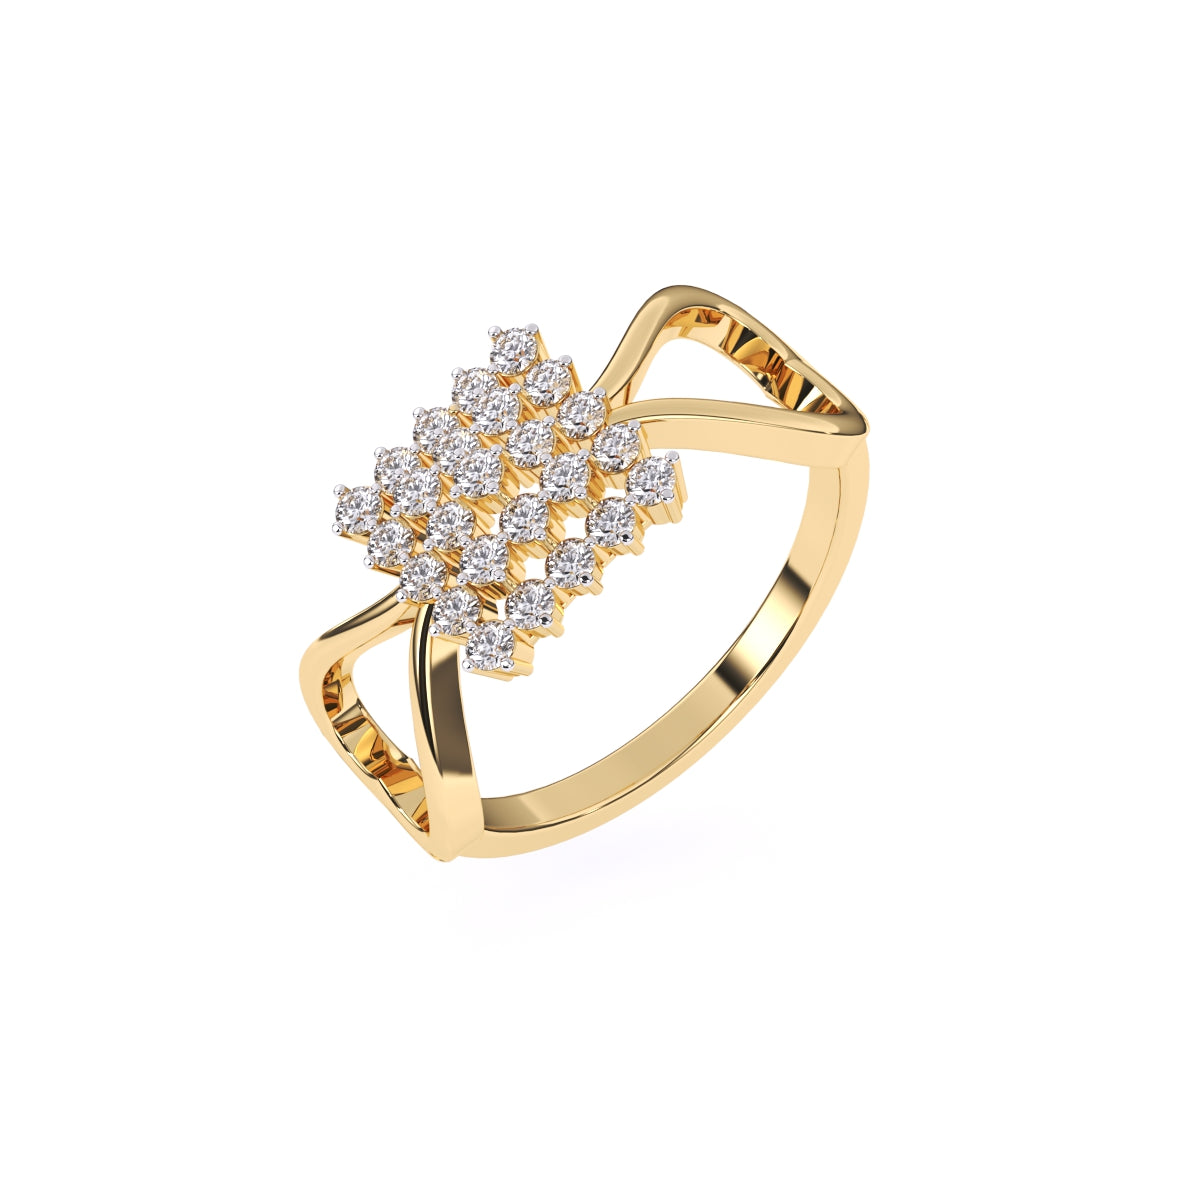 Buy quality 22K Gold Square Single Stone Ladies Ring in Ahmedabad